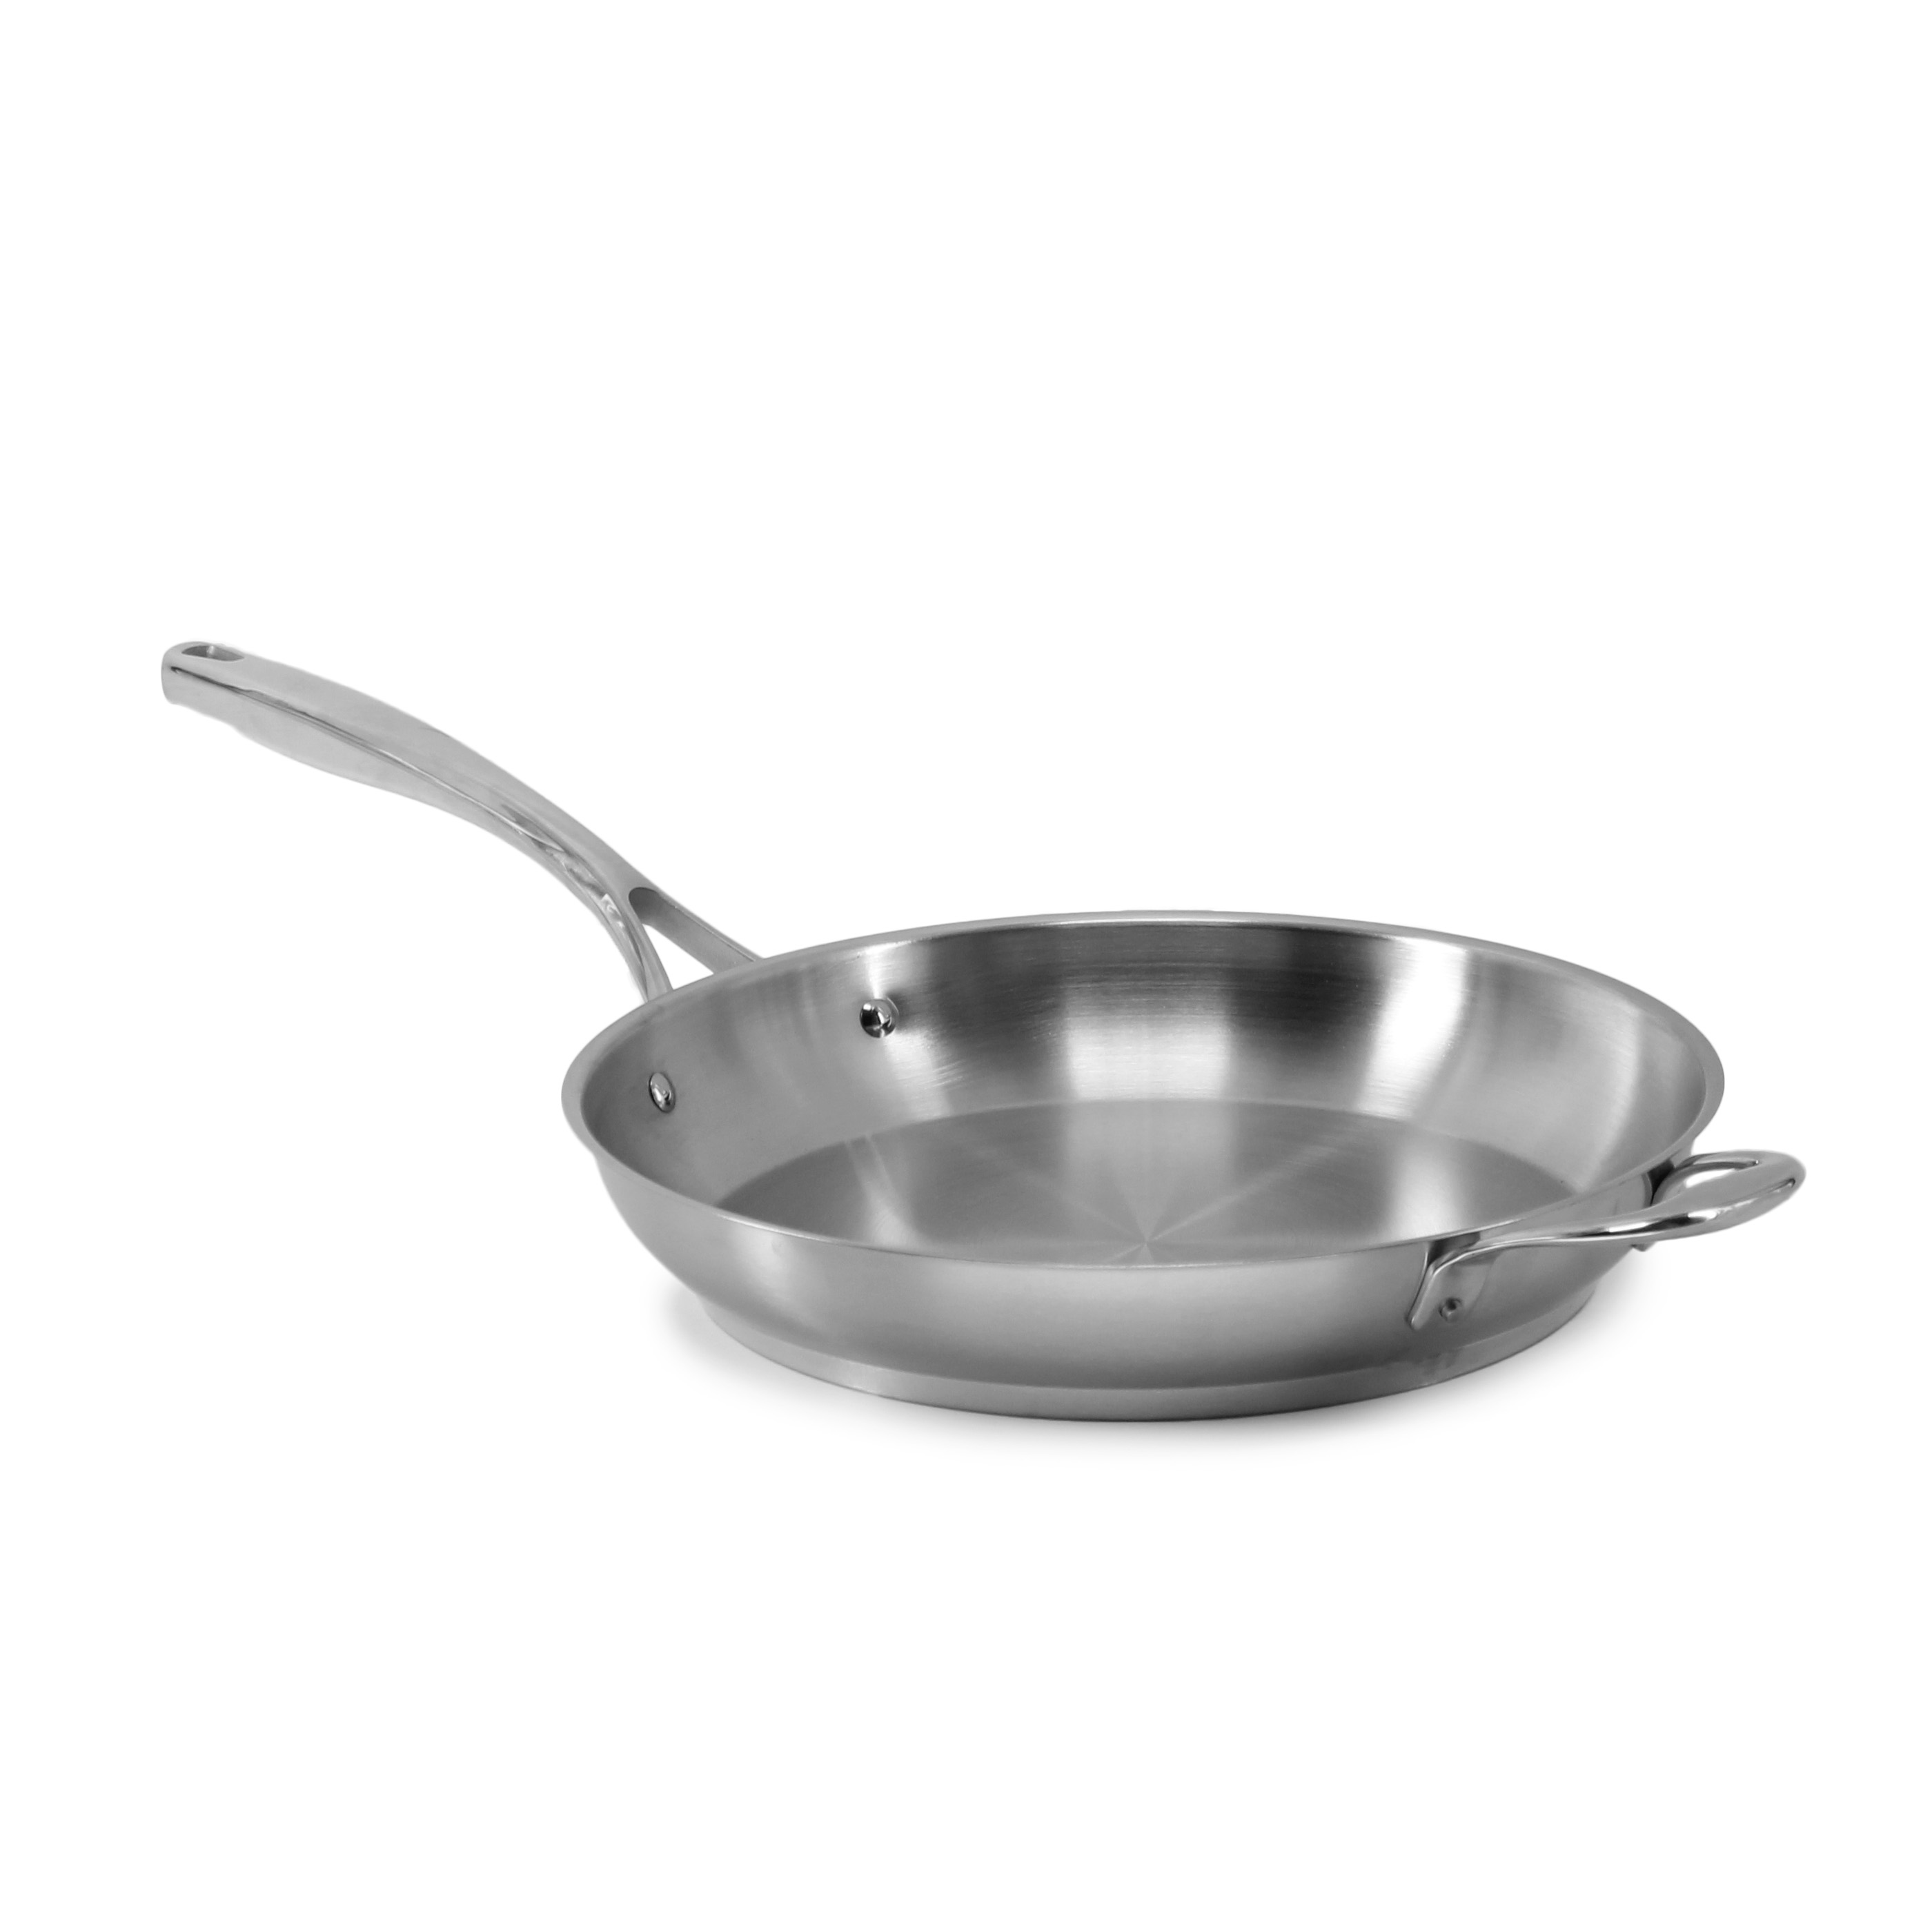 SignatureWares® Stainless Steel Frypan, Stainless Finish, 12.5" - FRYPANSS125